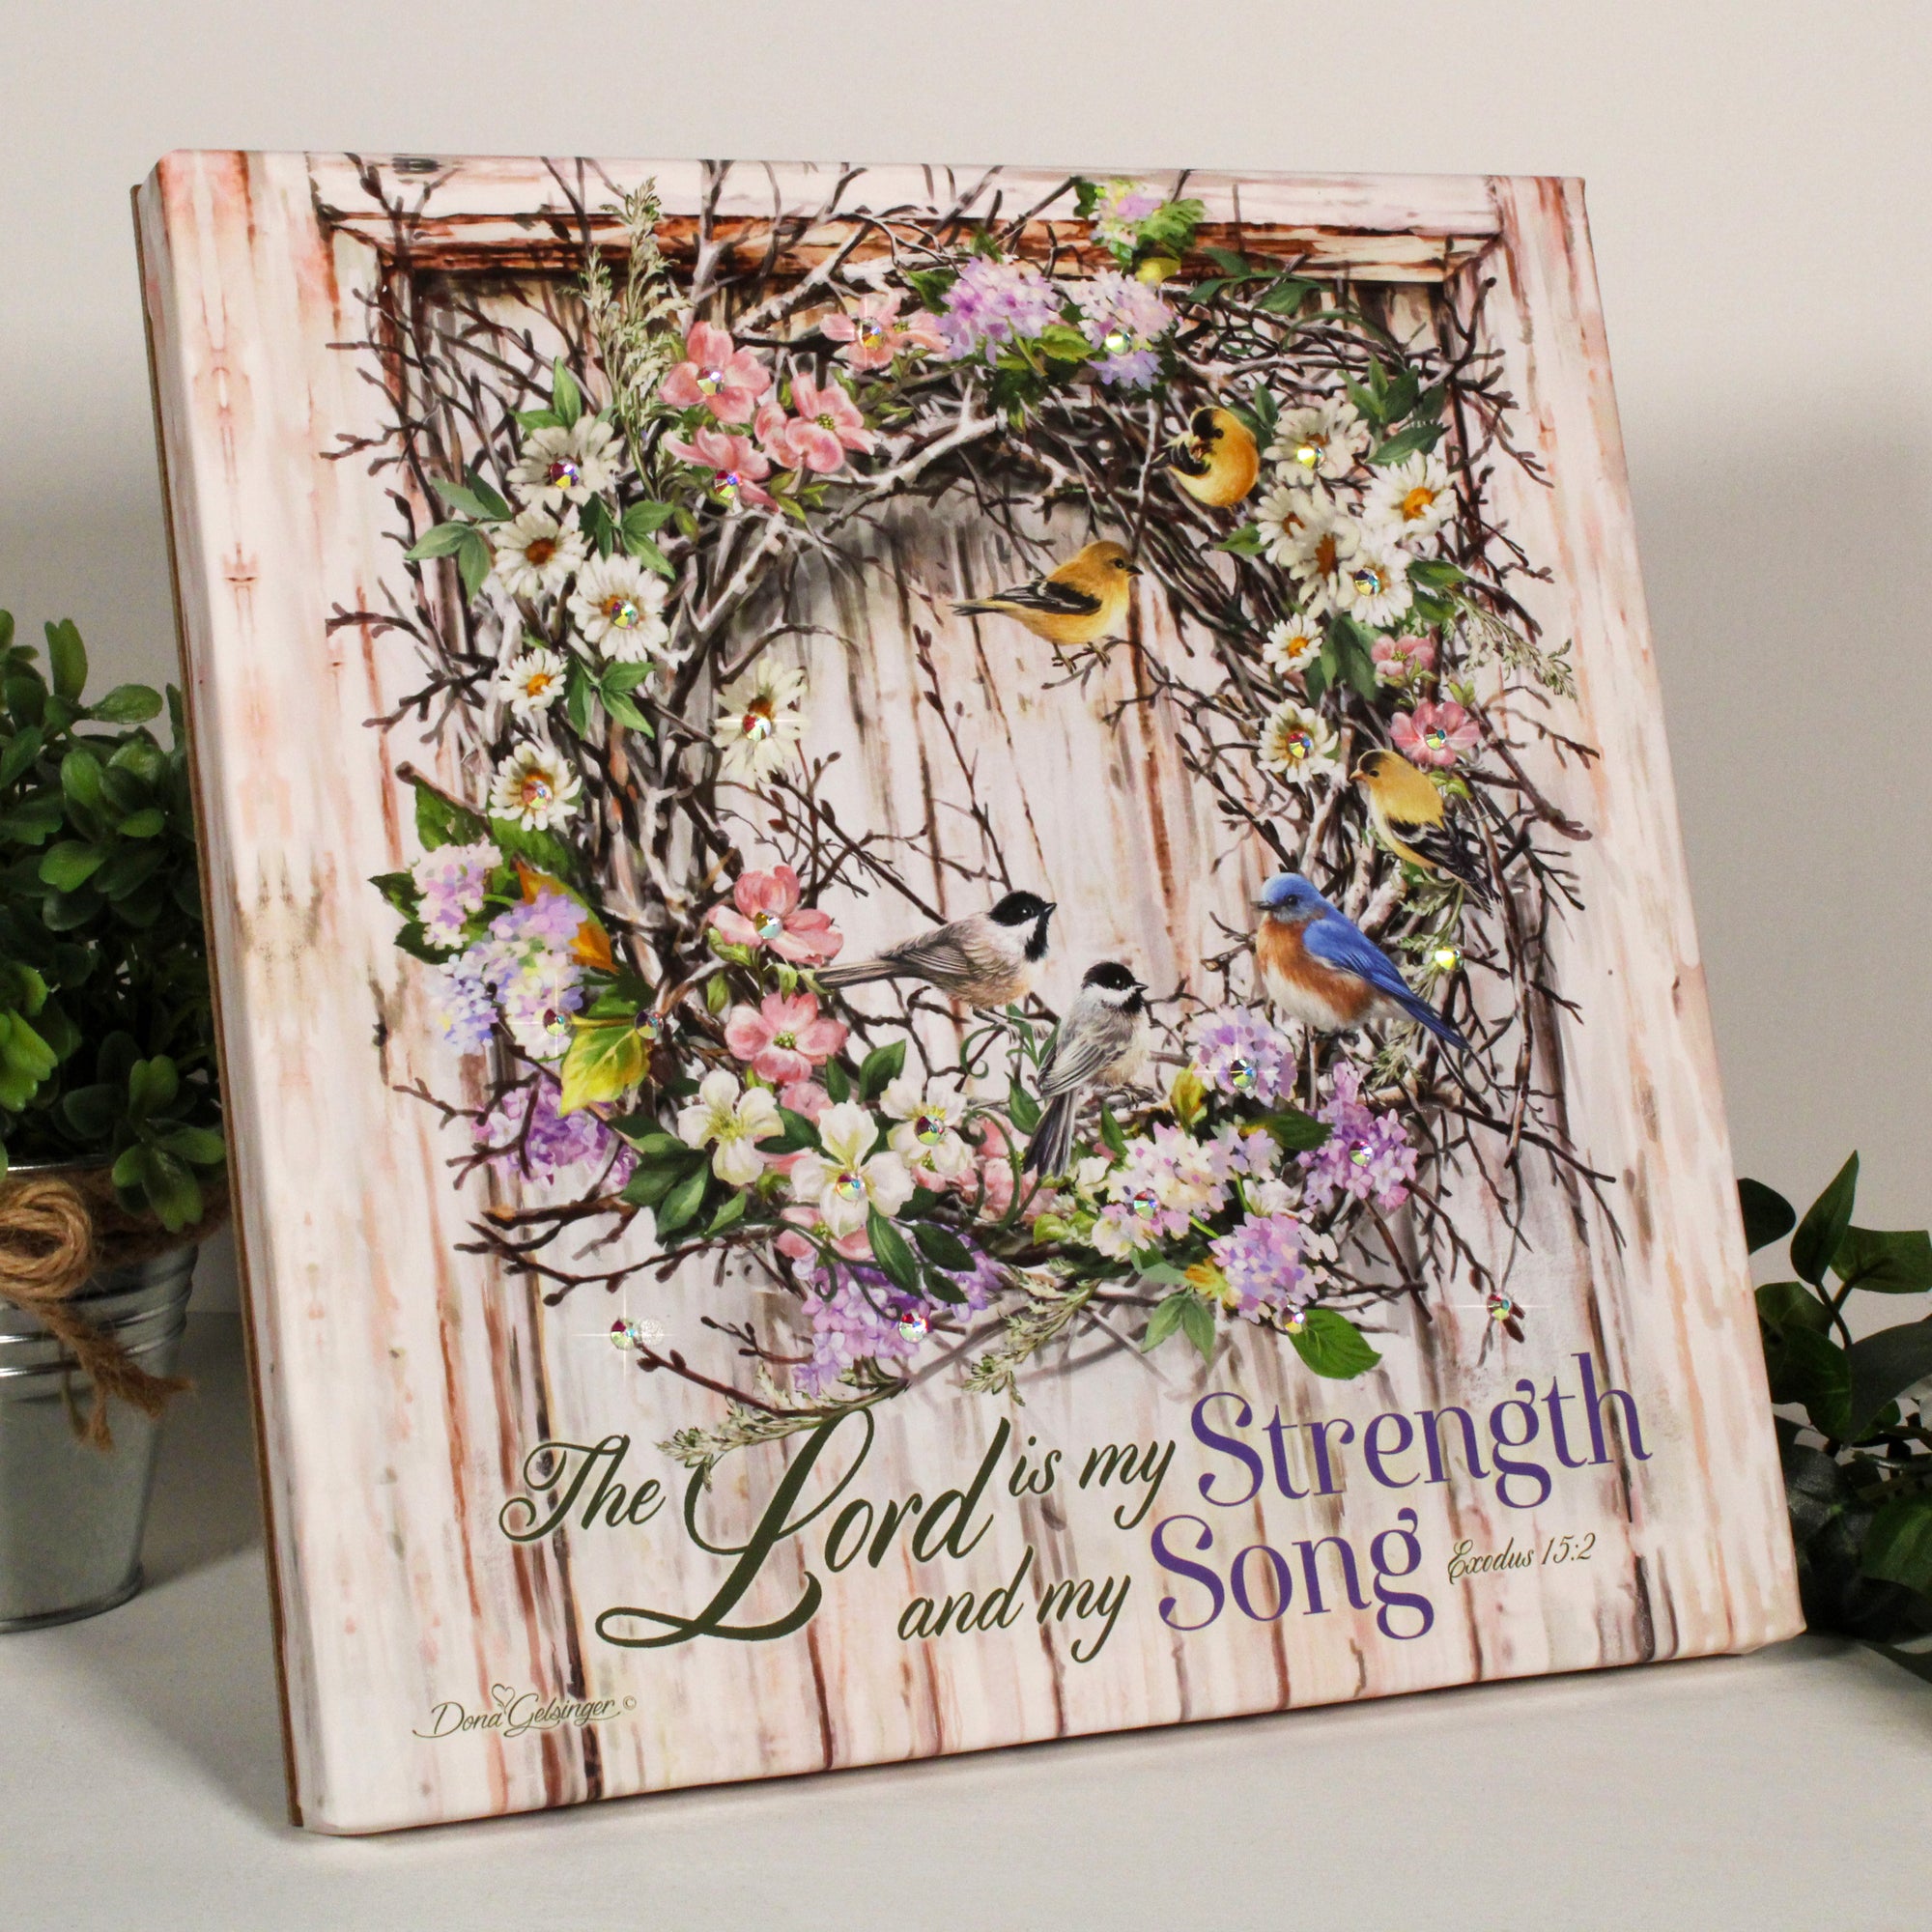 This exquisite wreath is bursting with vibrant multicolored flowers and an array of majestic birds, creating a stunning and uplifting centerpiece for any room.  Beneath the wreath, you'll find the inspiring words of Exodus 15:2.